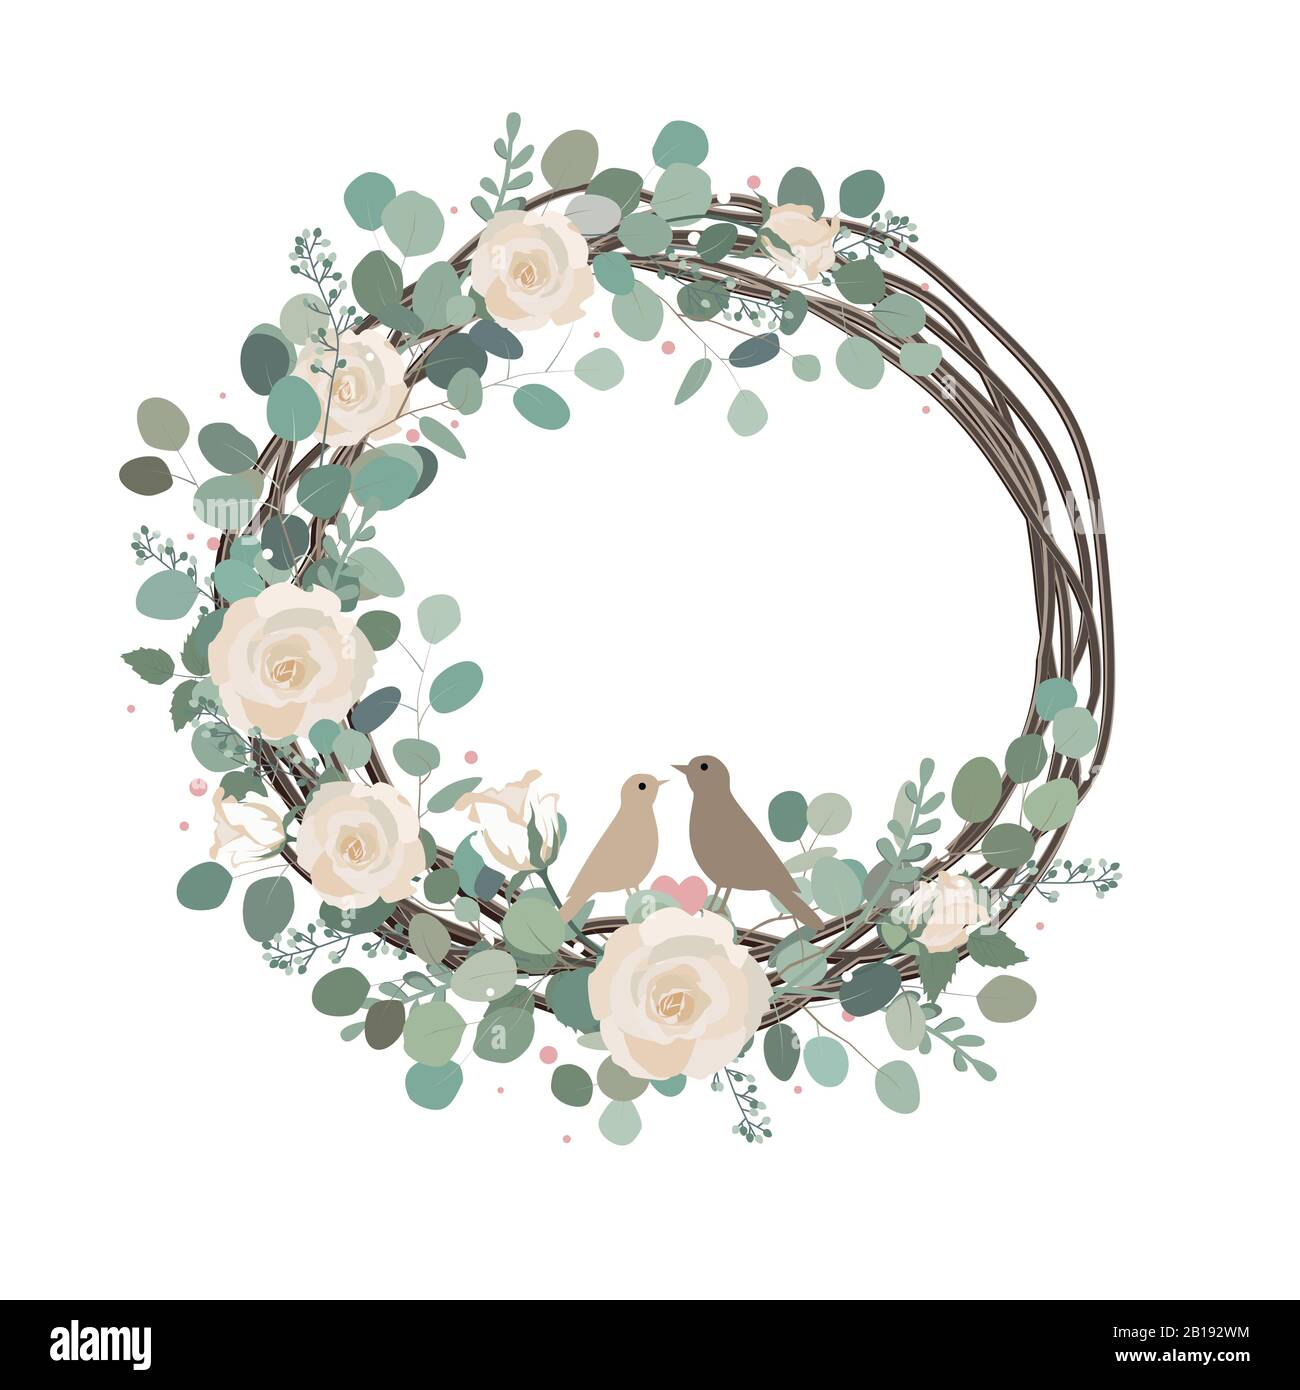 Happy Easter Spring vector card with roses, eucalyptus branches, and birds couple. Rustic vintage composition on white, home decor Stock Vector